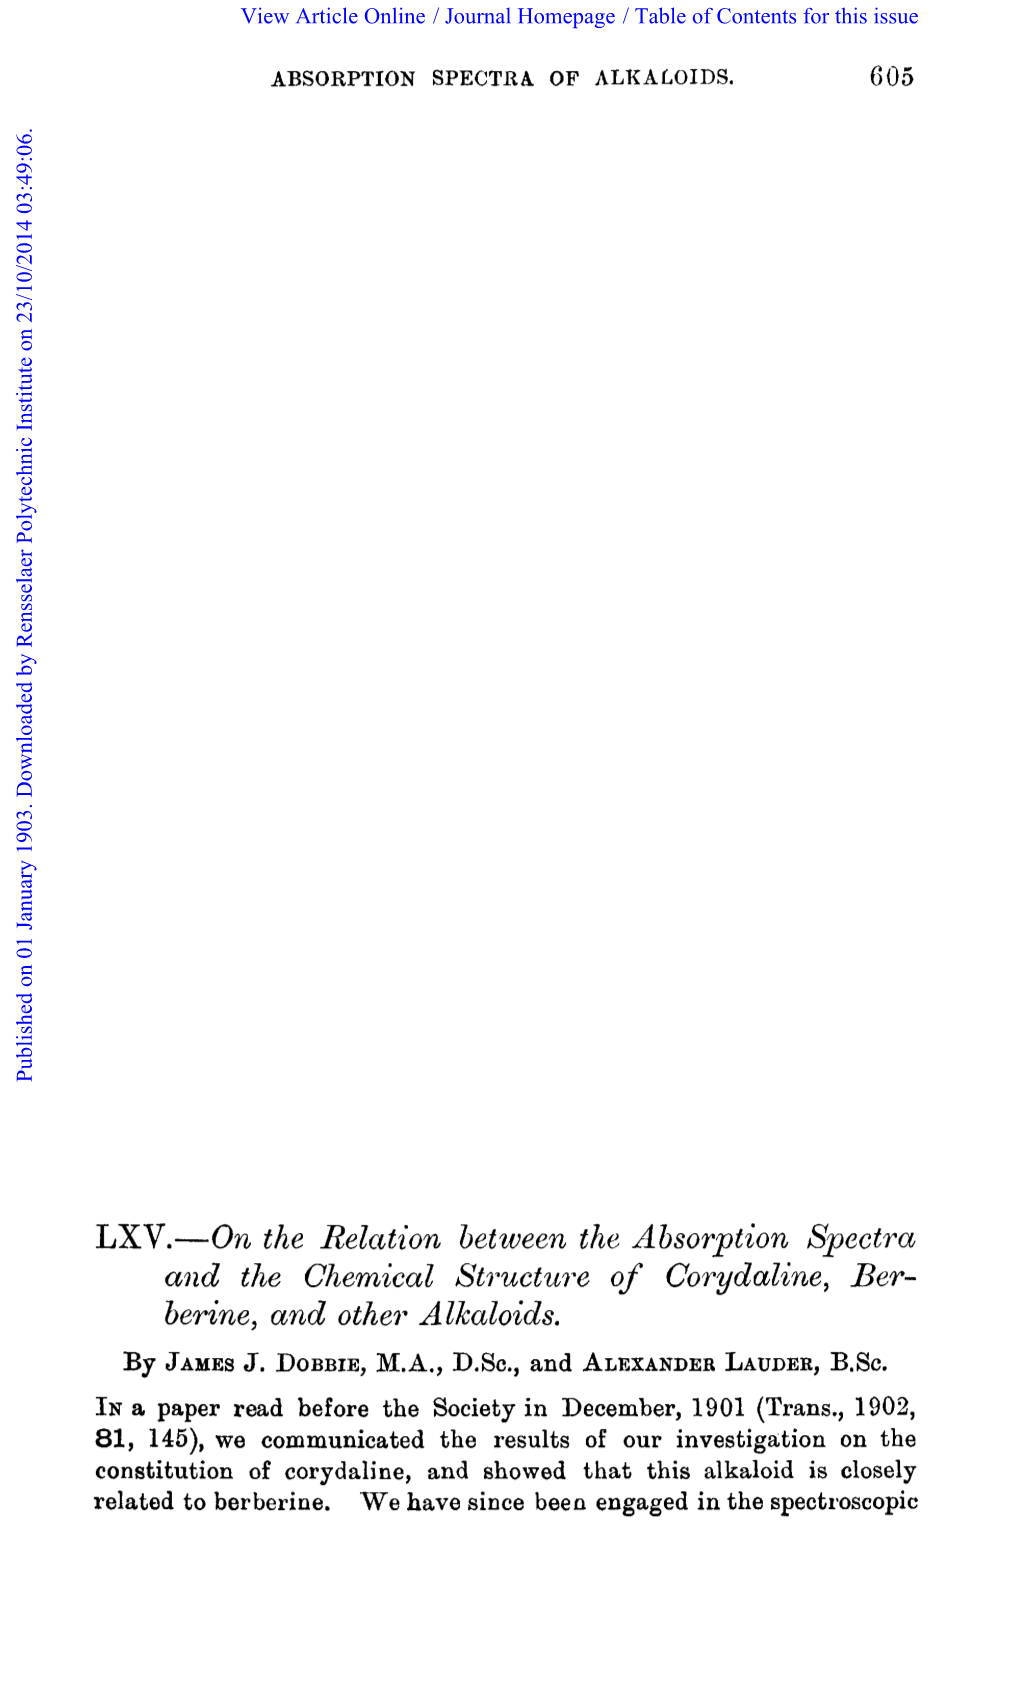 LXV.-On the Relation Bet Ween the Absorption Spectra and the Chemical Stmetwe of Corydaline, Ber- Berine, and Other Alkaloids